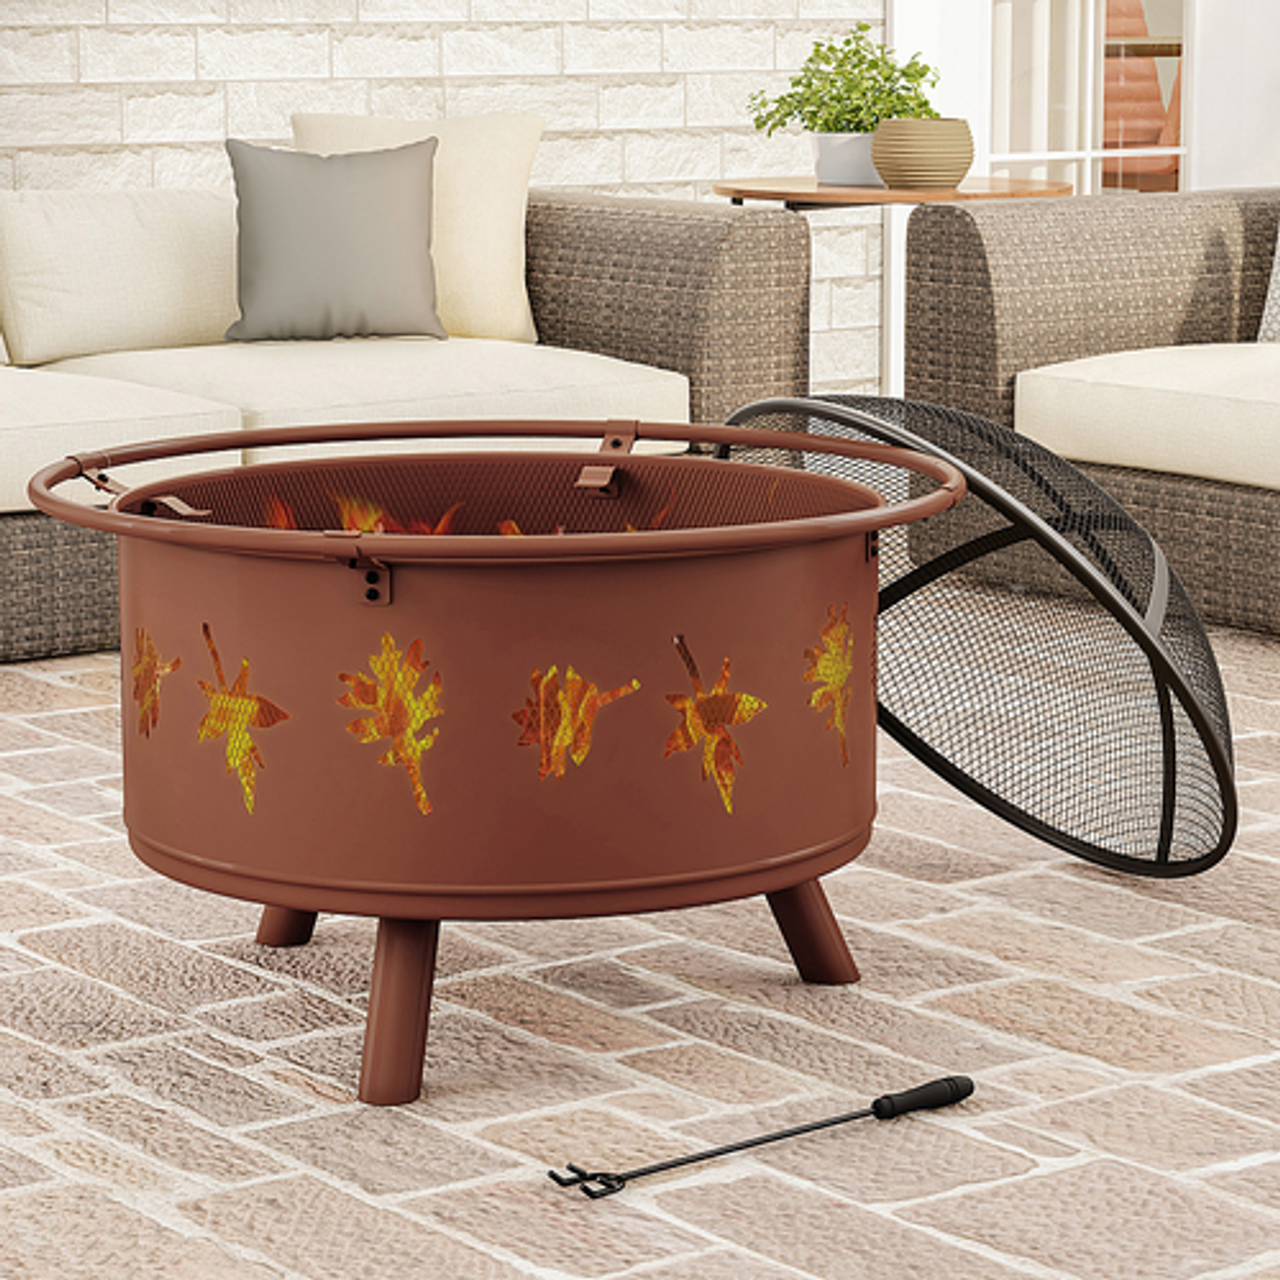 Nature Spring - 32" Fire Pit – Round Outdoor Fireplace with Steel Bowl, Leaf Cutouts for Patio Wood Burning - Rugged Rust